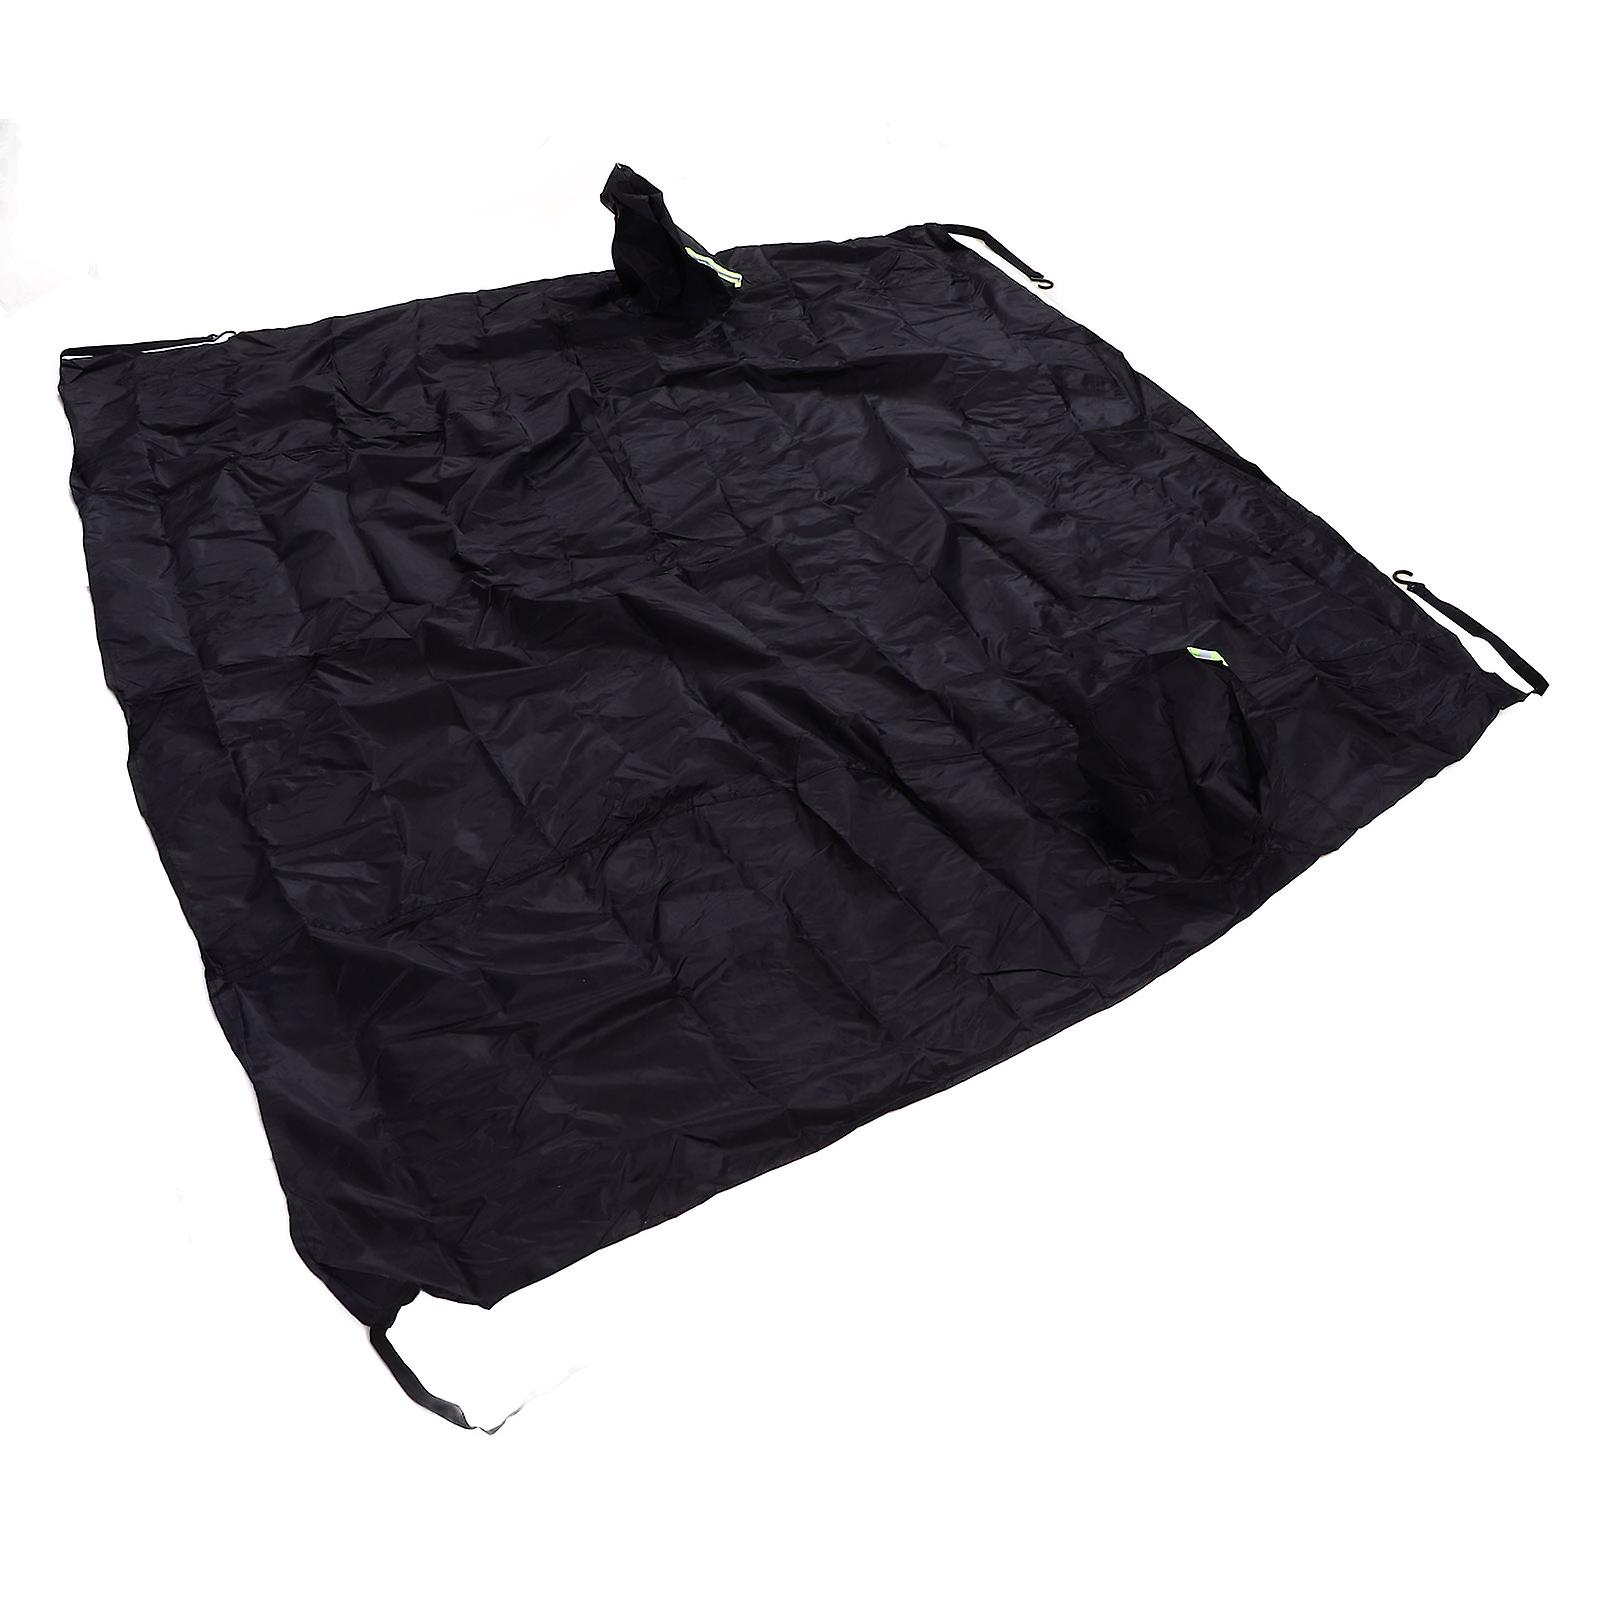 Windshield Cover Waterproof Snowproof Large Coverage Area Universal Windshield Protector With Reflective Stripsblack